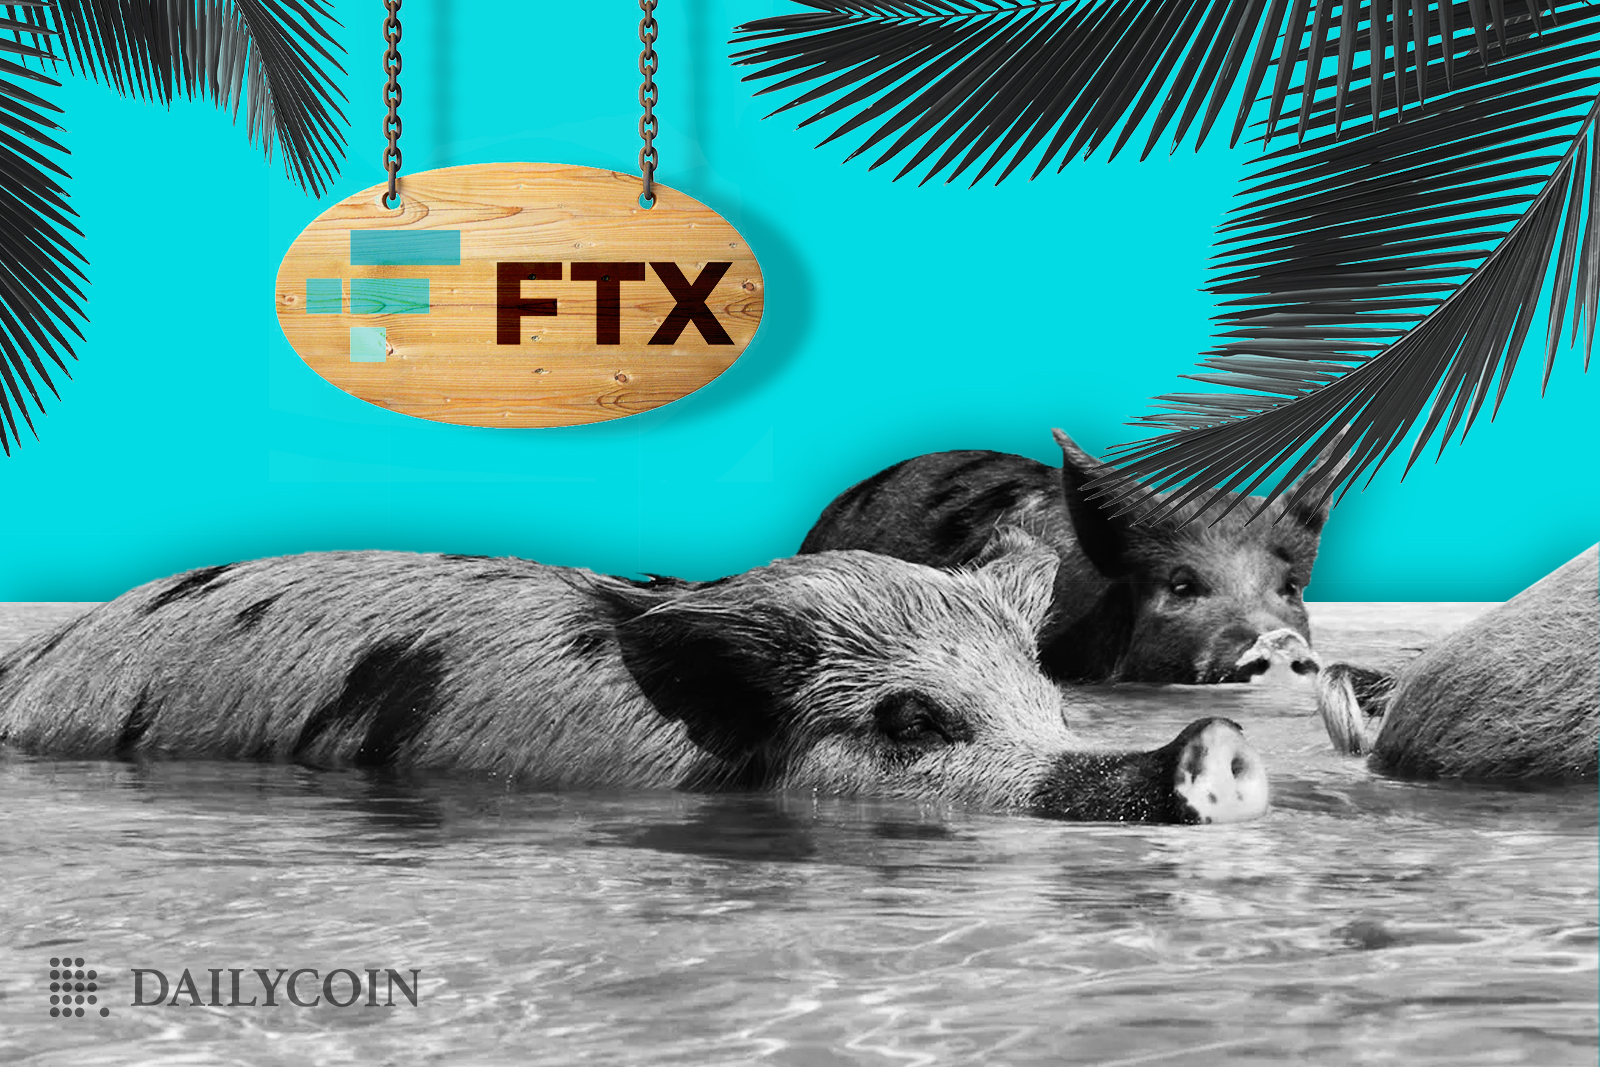 Two pigs are swimming in front of a wooden sign with FTX logo on it